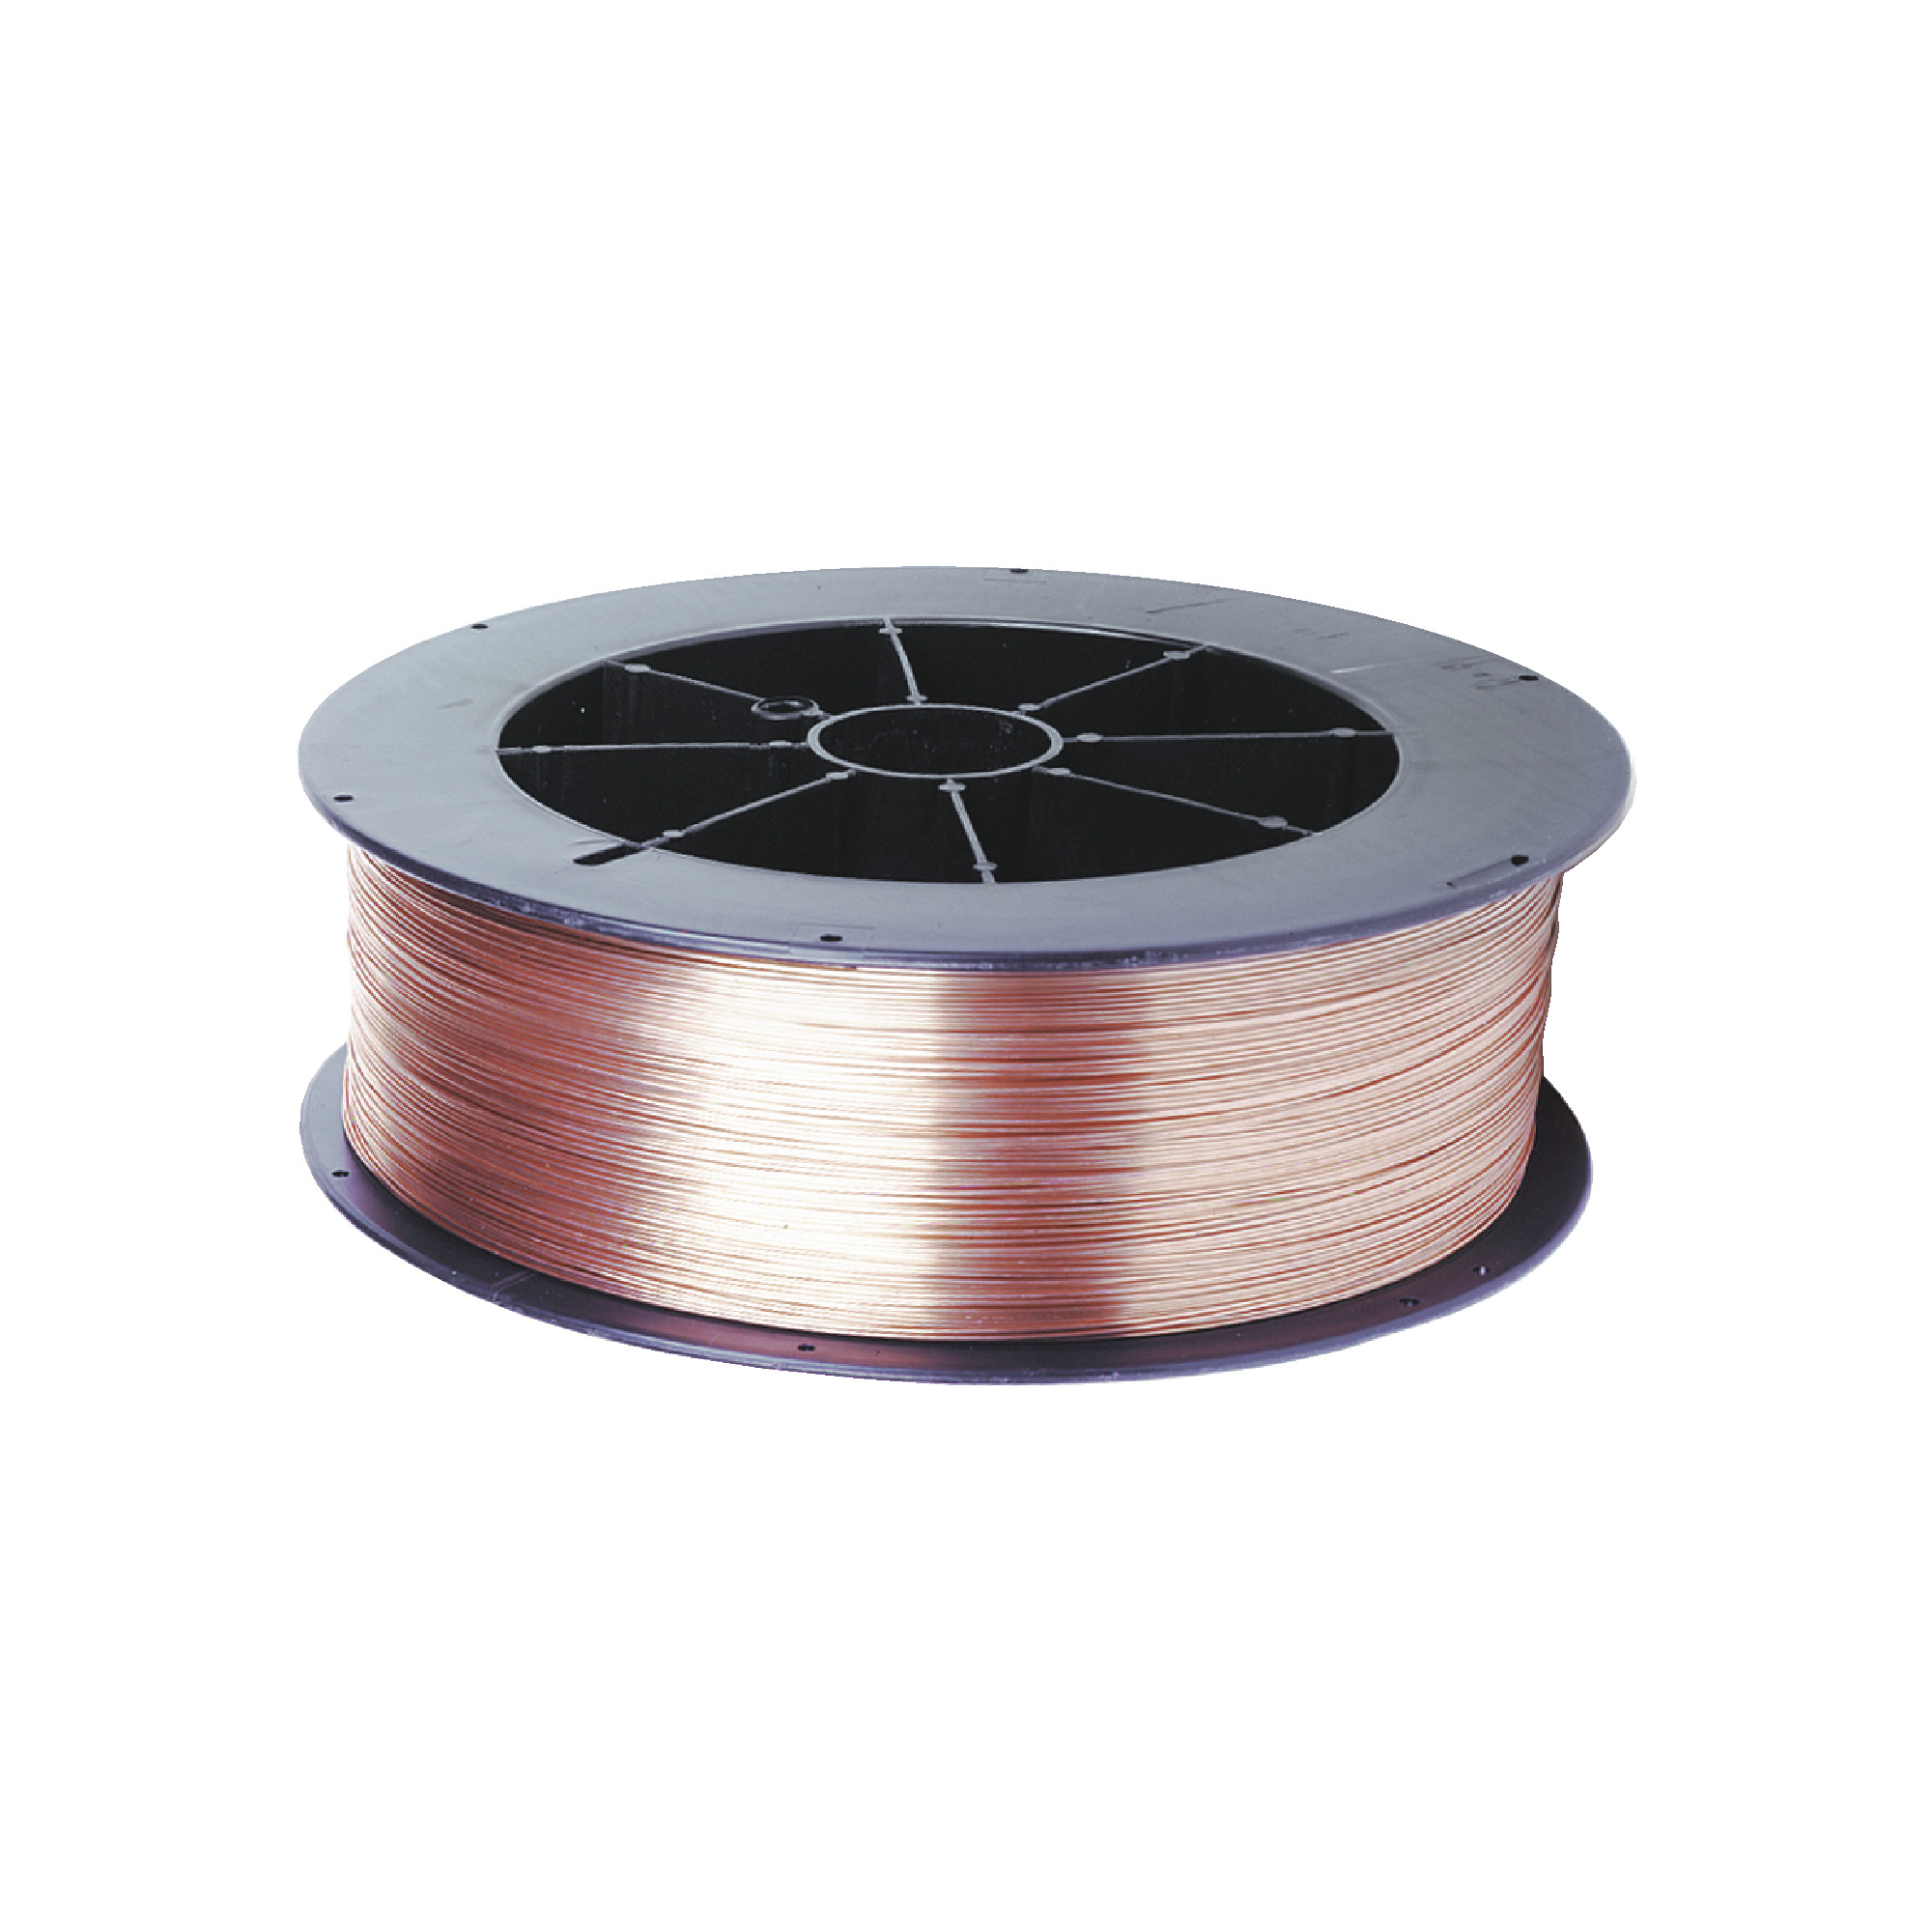 .030" ER70S-6 Super Arc L-56 Copper Coated Carbon Steel MIG Welding Wire - 12.5 lbs. Spool